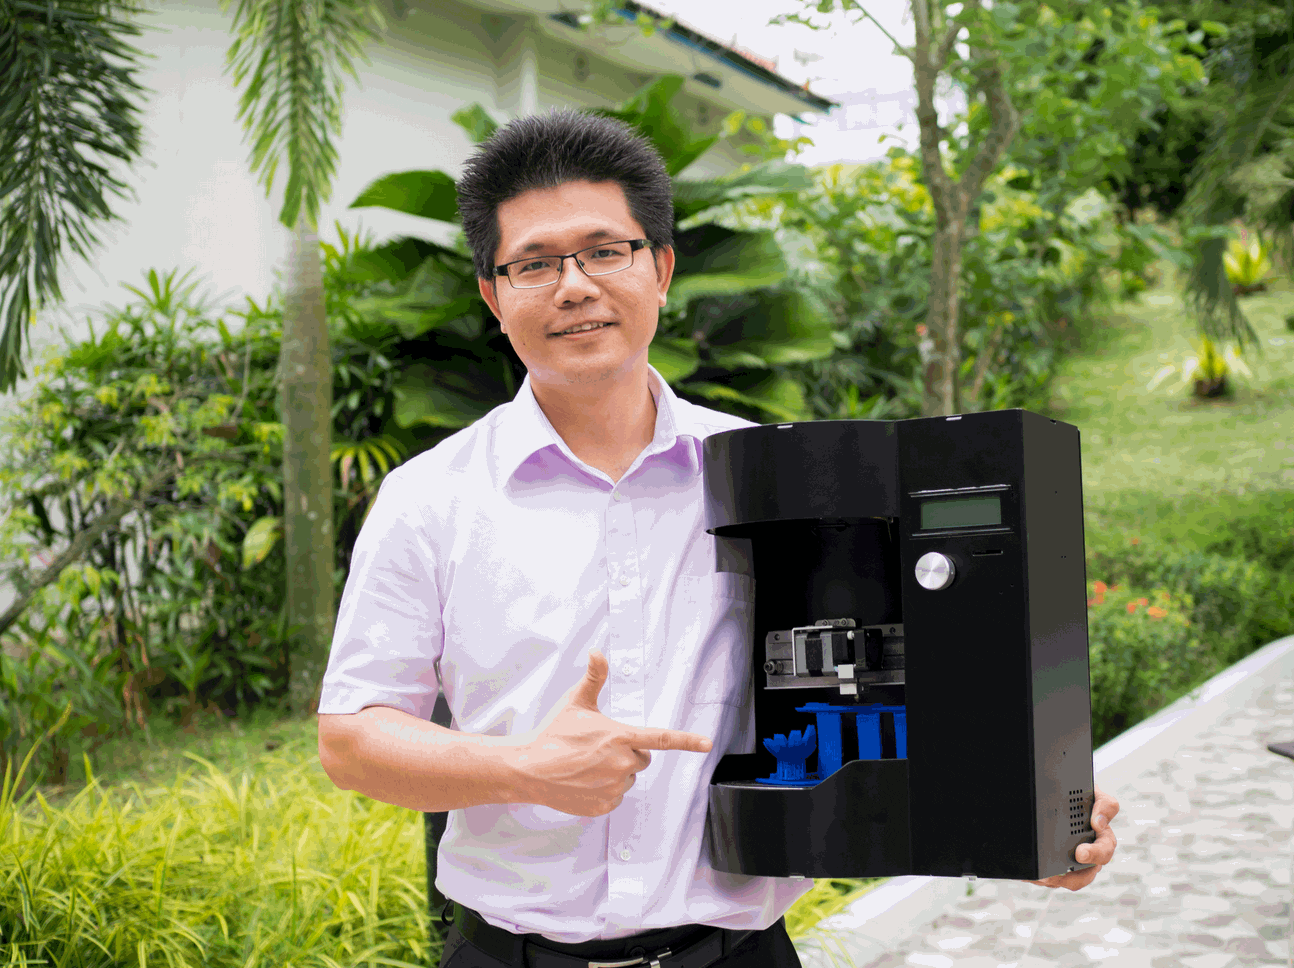 World’s first compact rotary 3D printer-cum-scanner unveiled at AAAS by NTU Singapore start-up